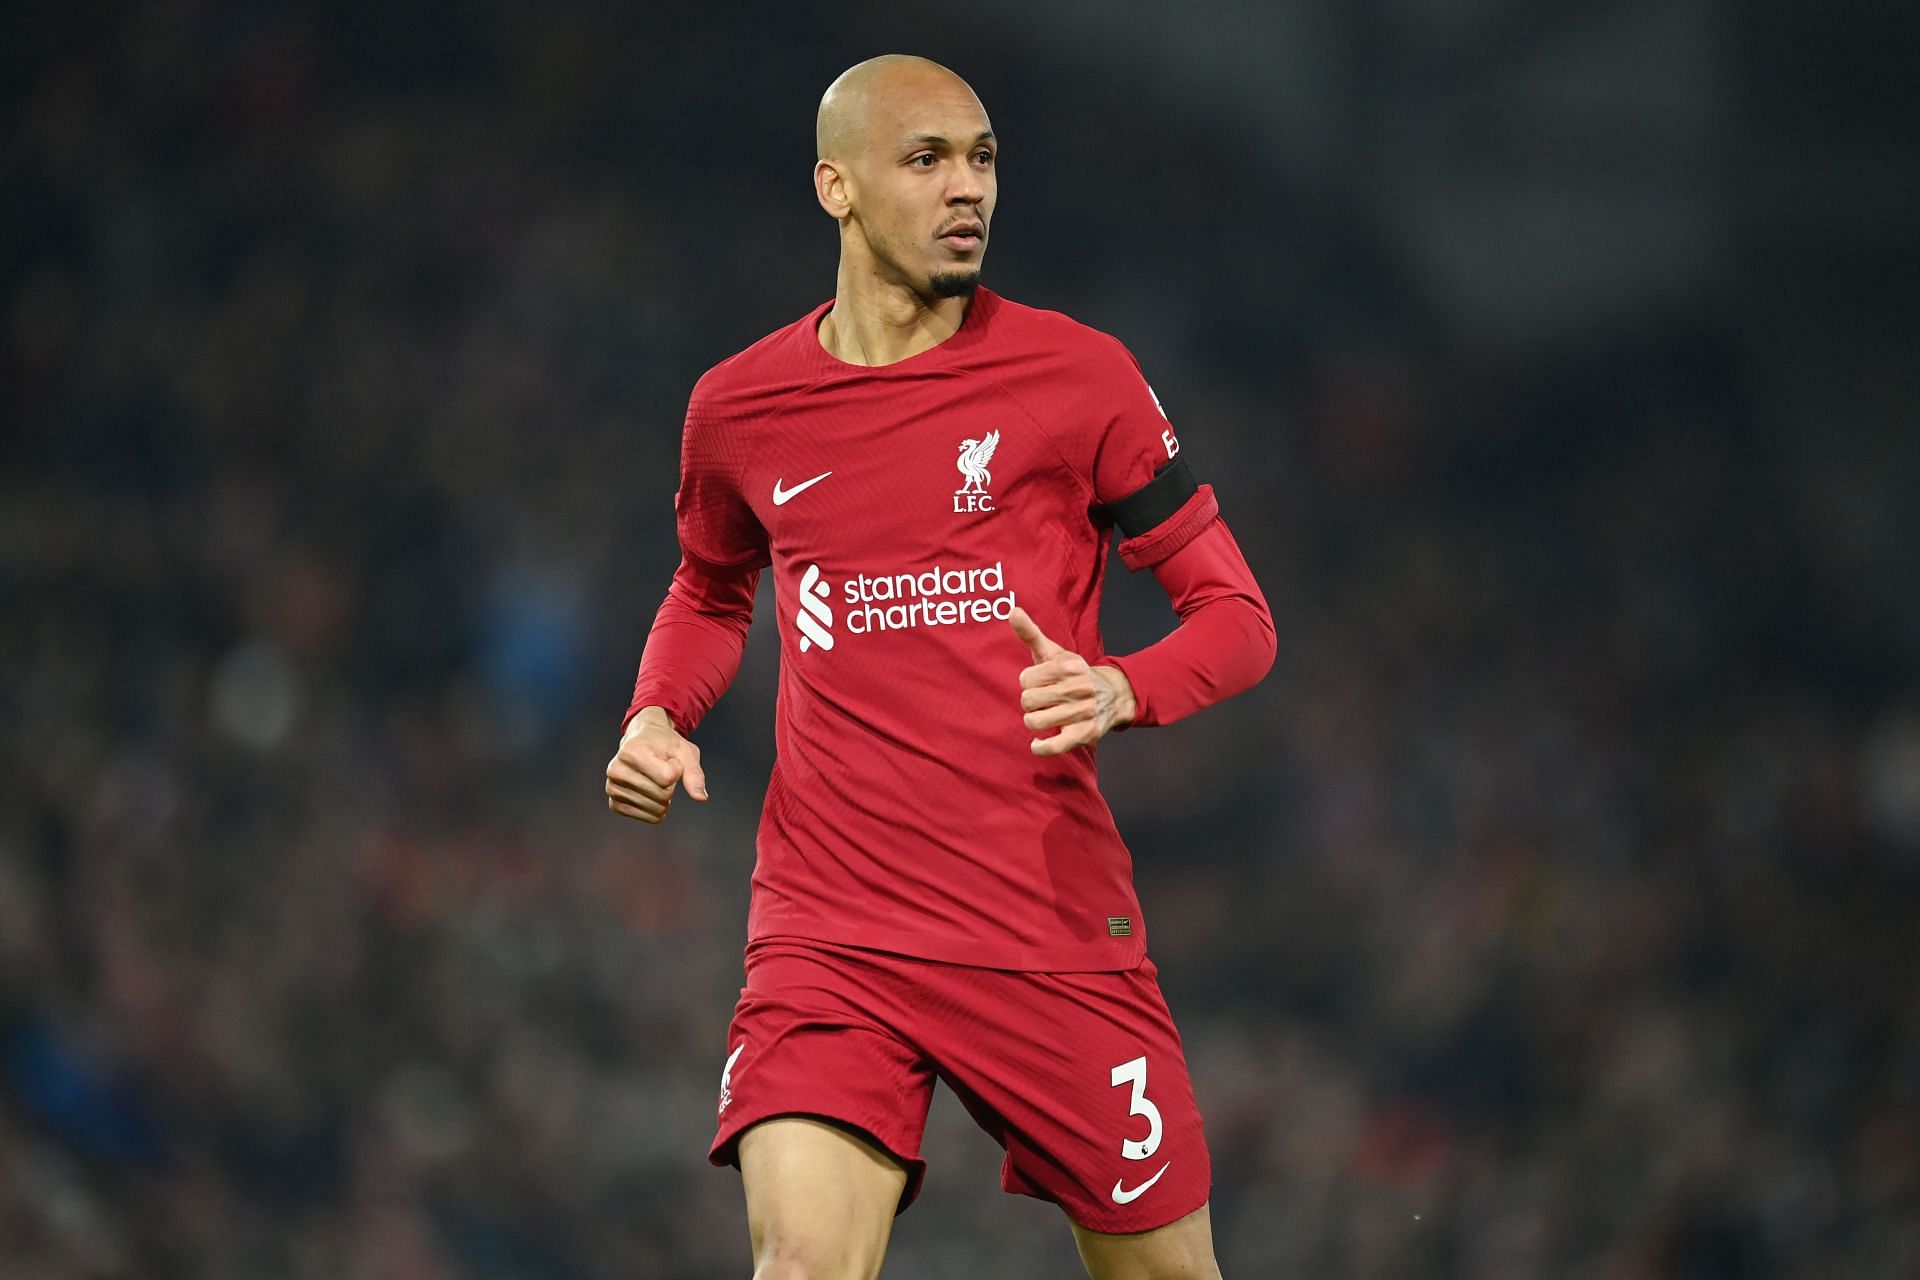 Fabinho is glad to see the Reds bolster their midfield.